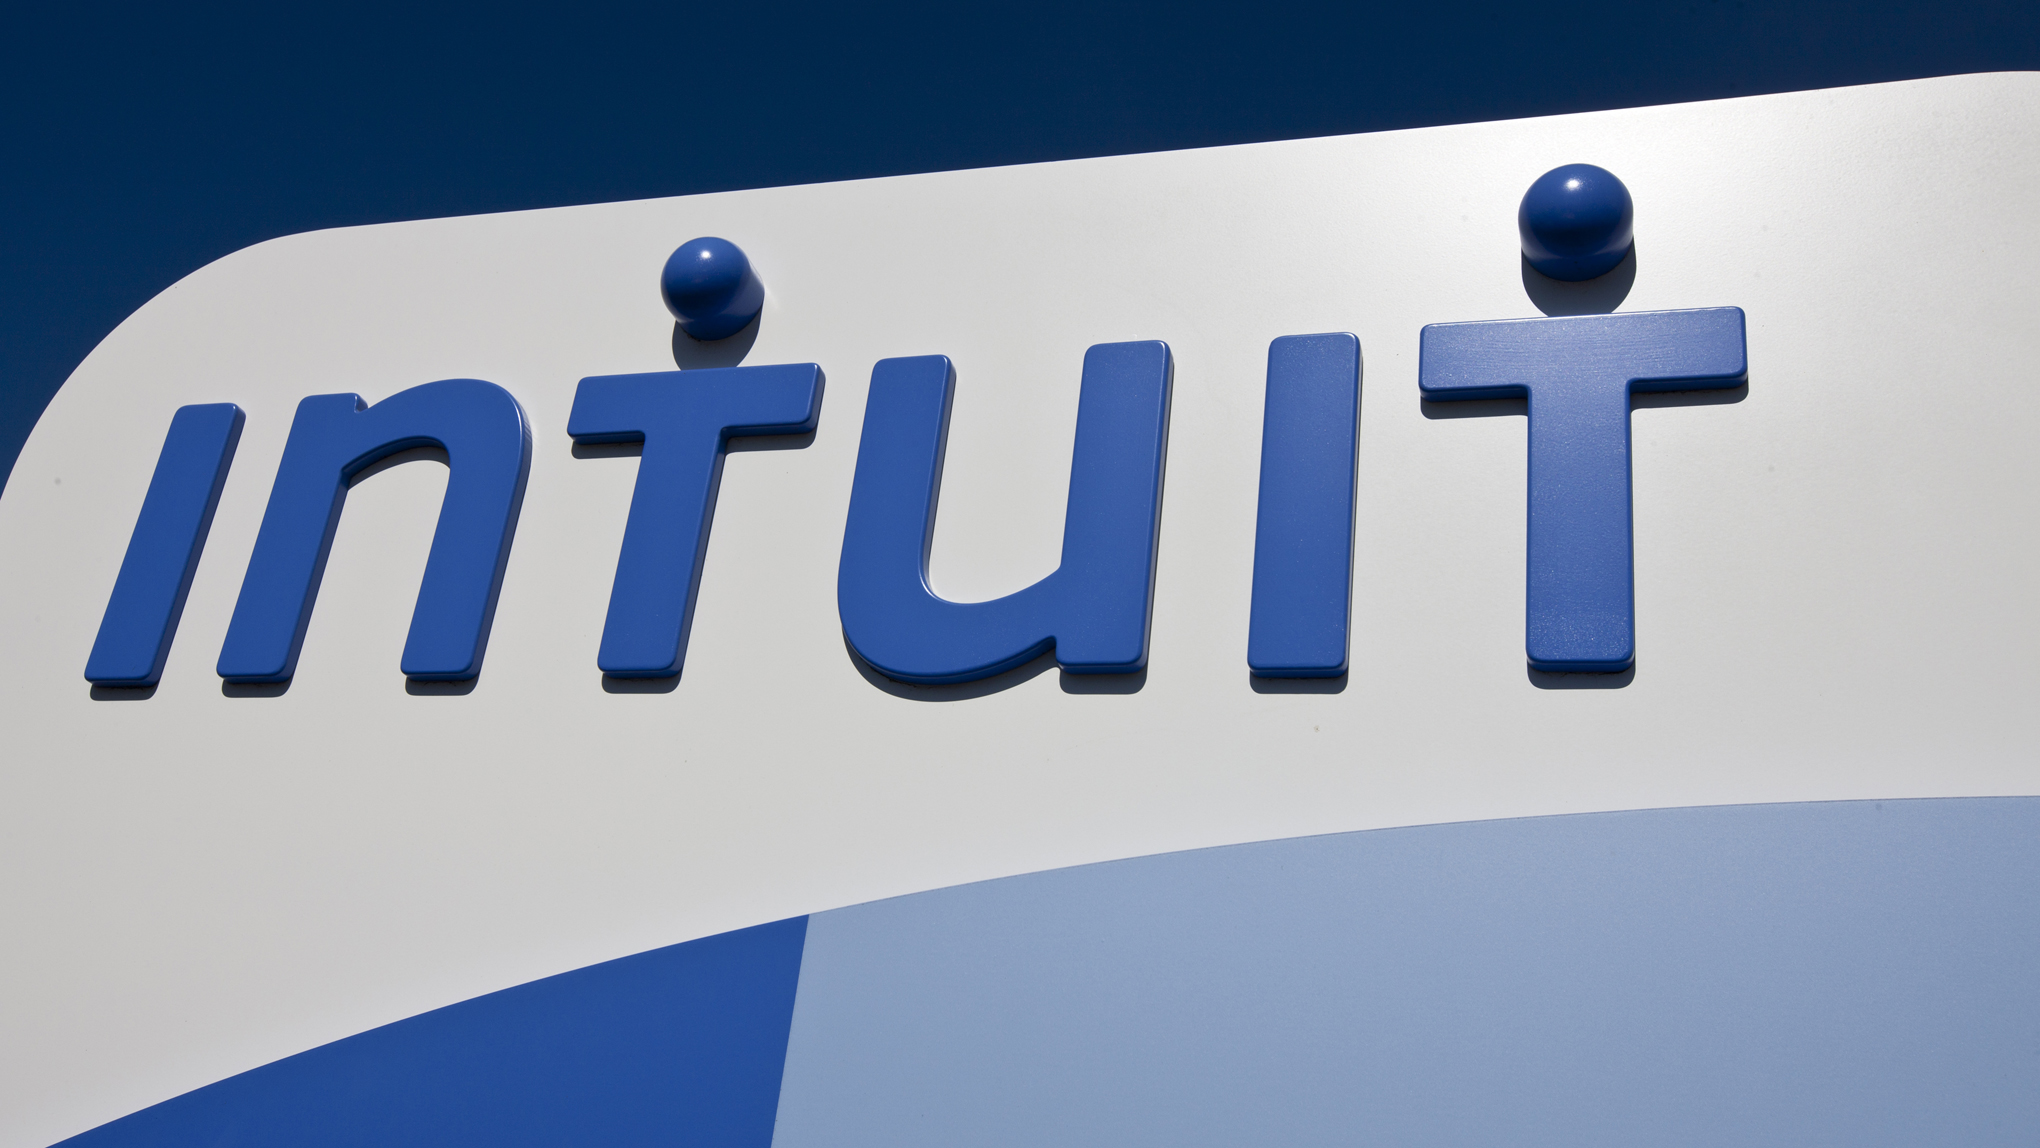 Intuit’s ‘rise of the rest’ M&A strategy means large paydays outside the Valley